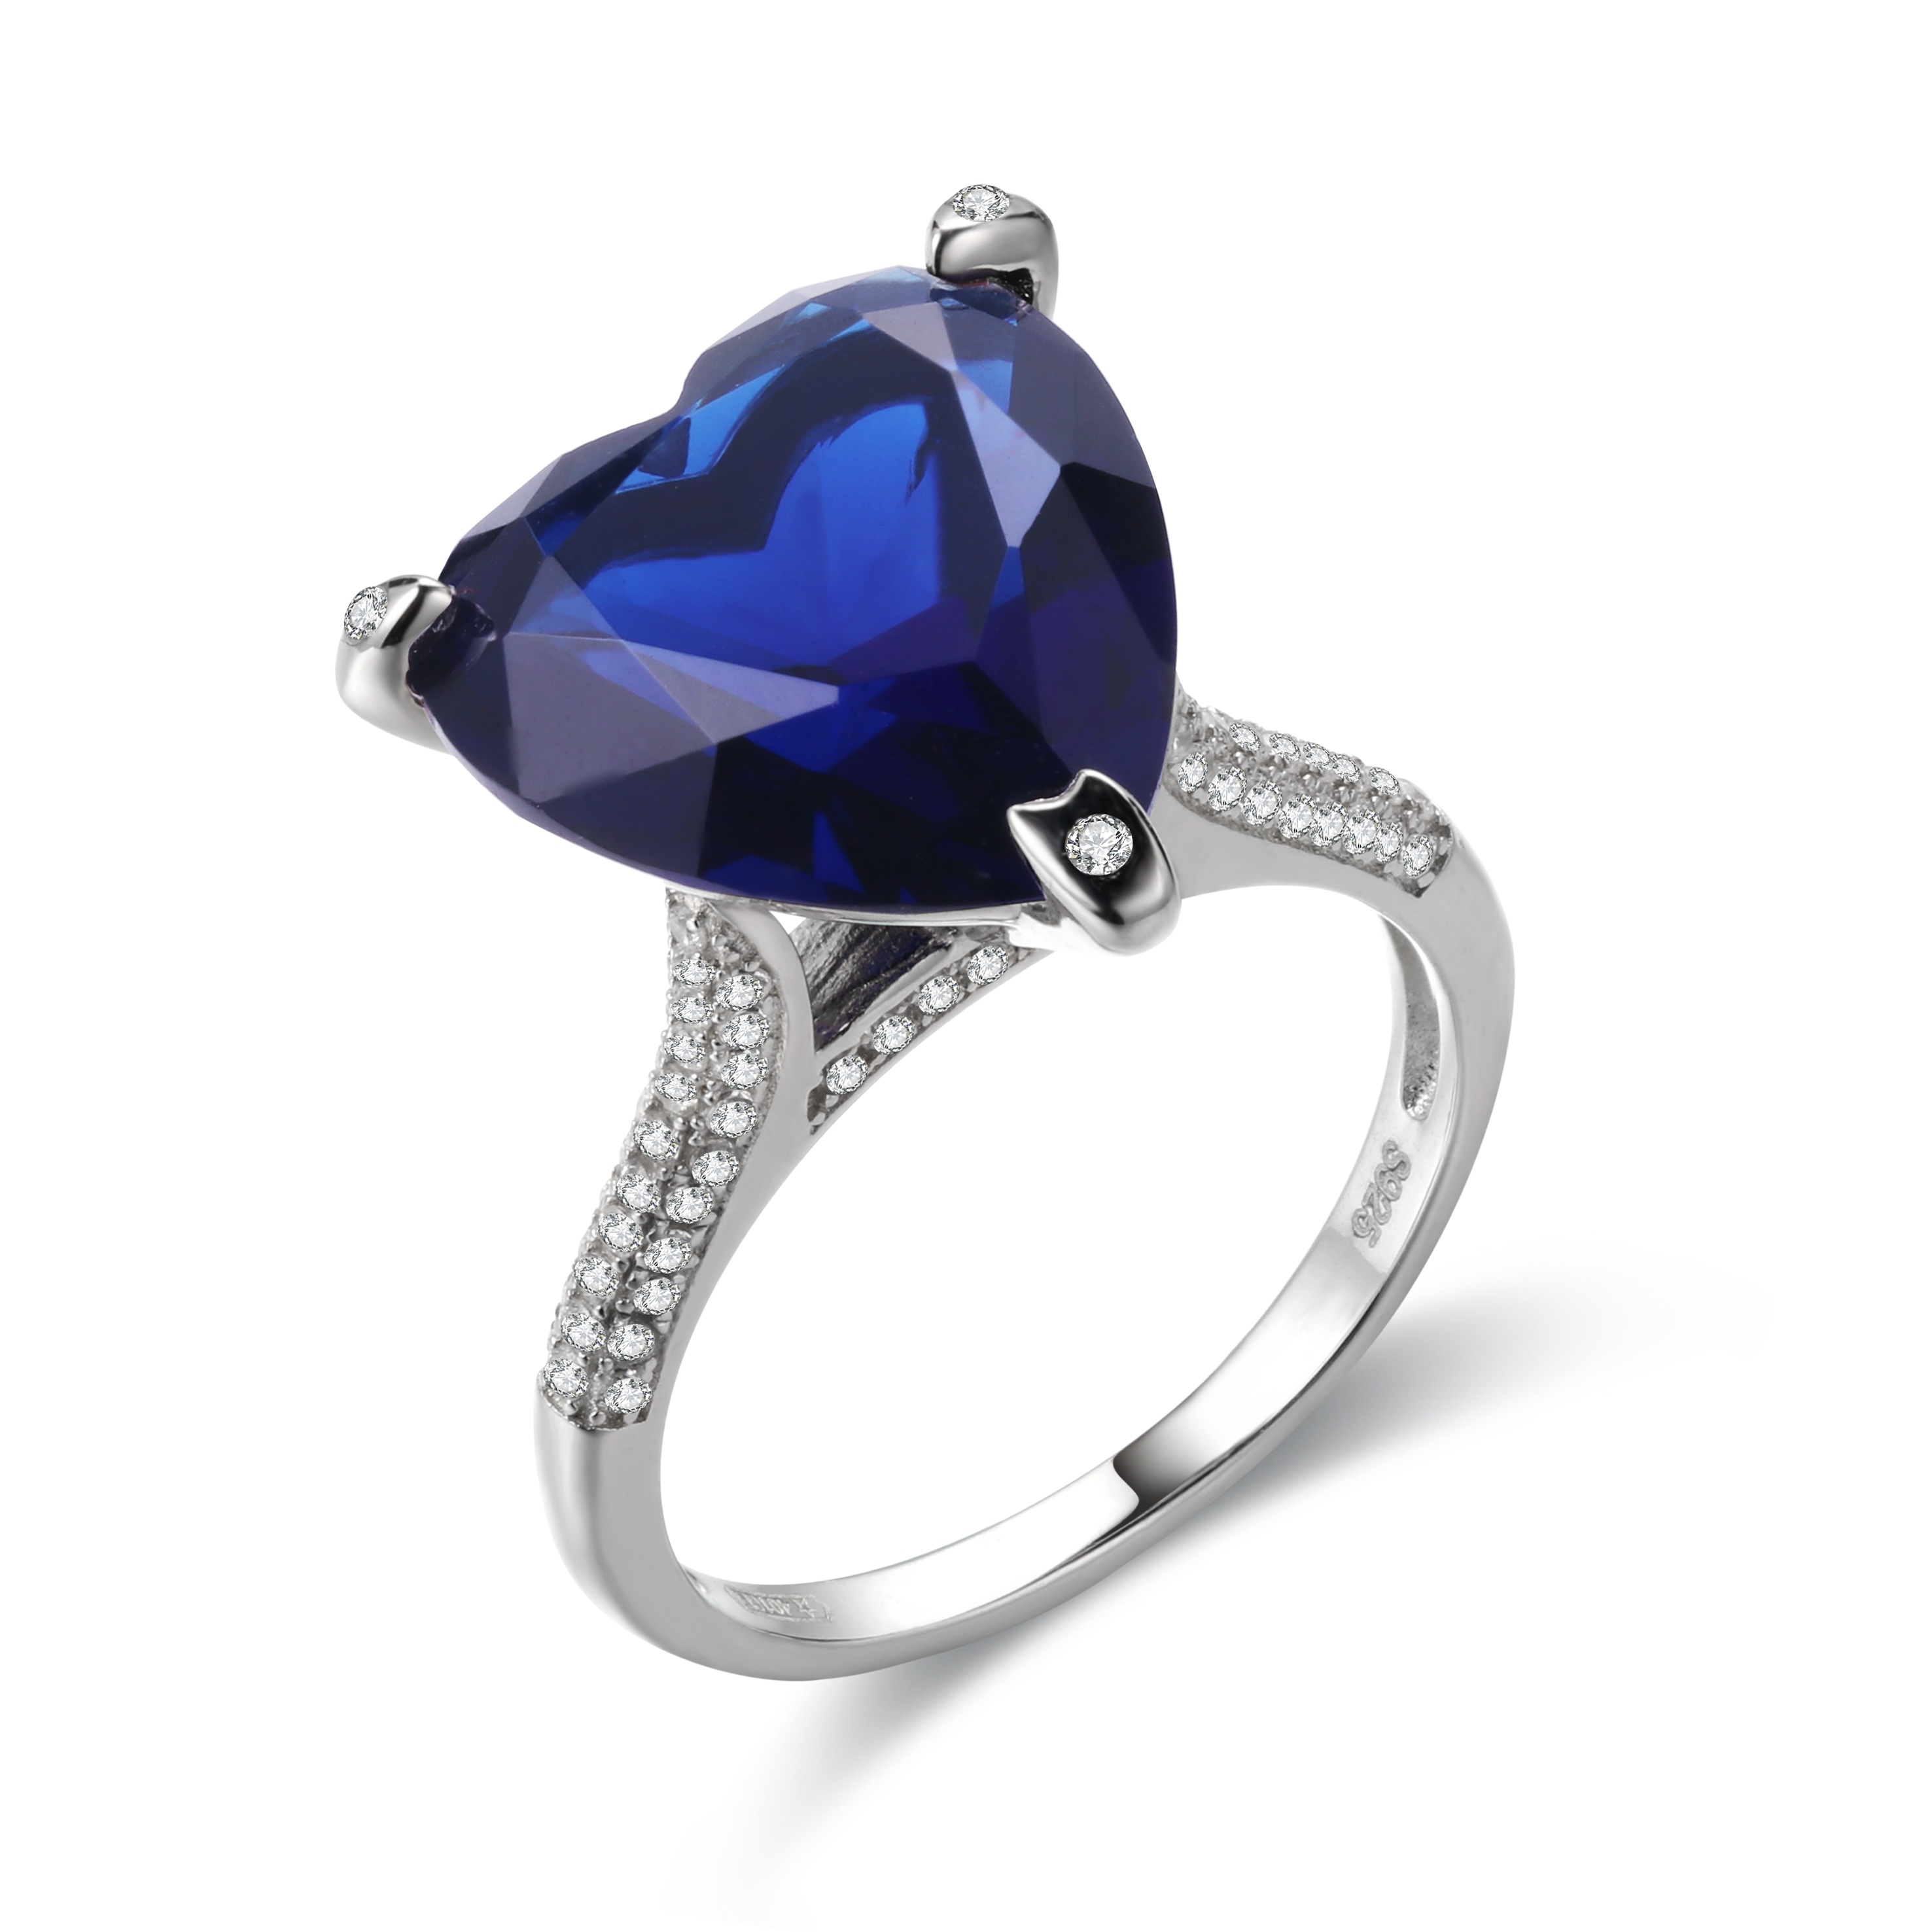 Custom Wholesale Sapphire Ring Jewelers | Heart Jewelry Design | Sterling Silver Fashion Jewelry  Wholesale